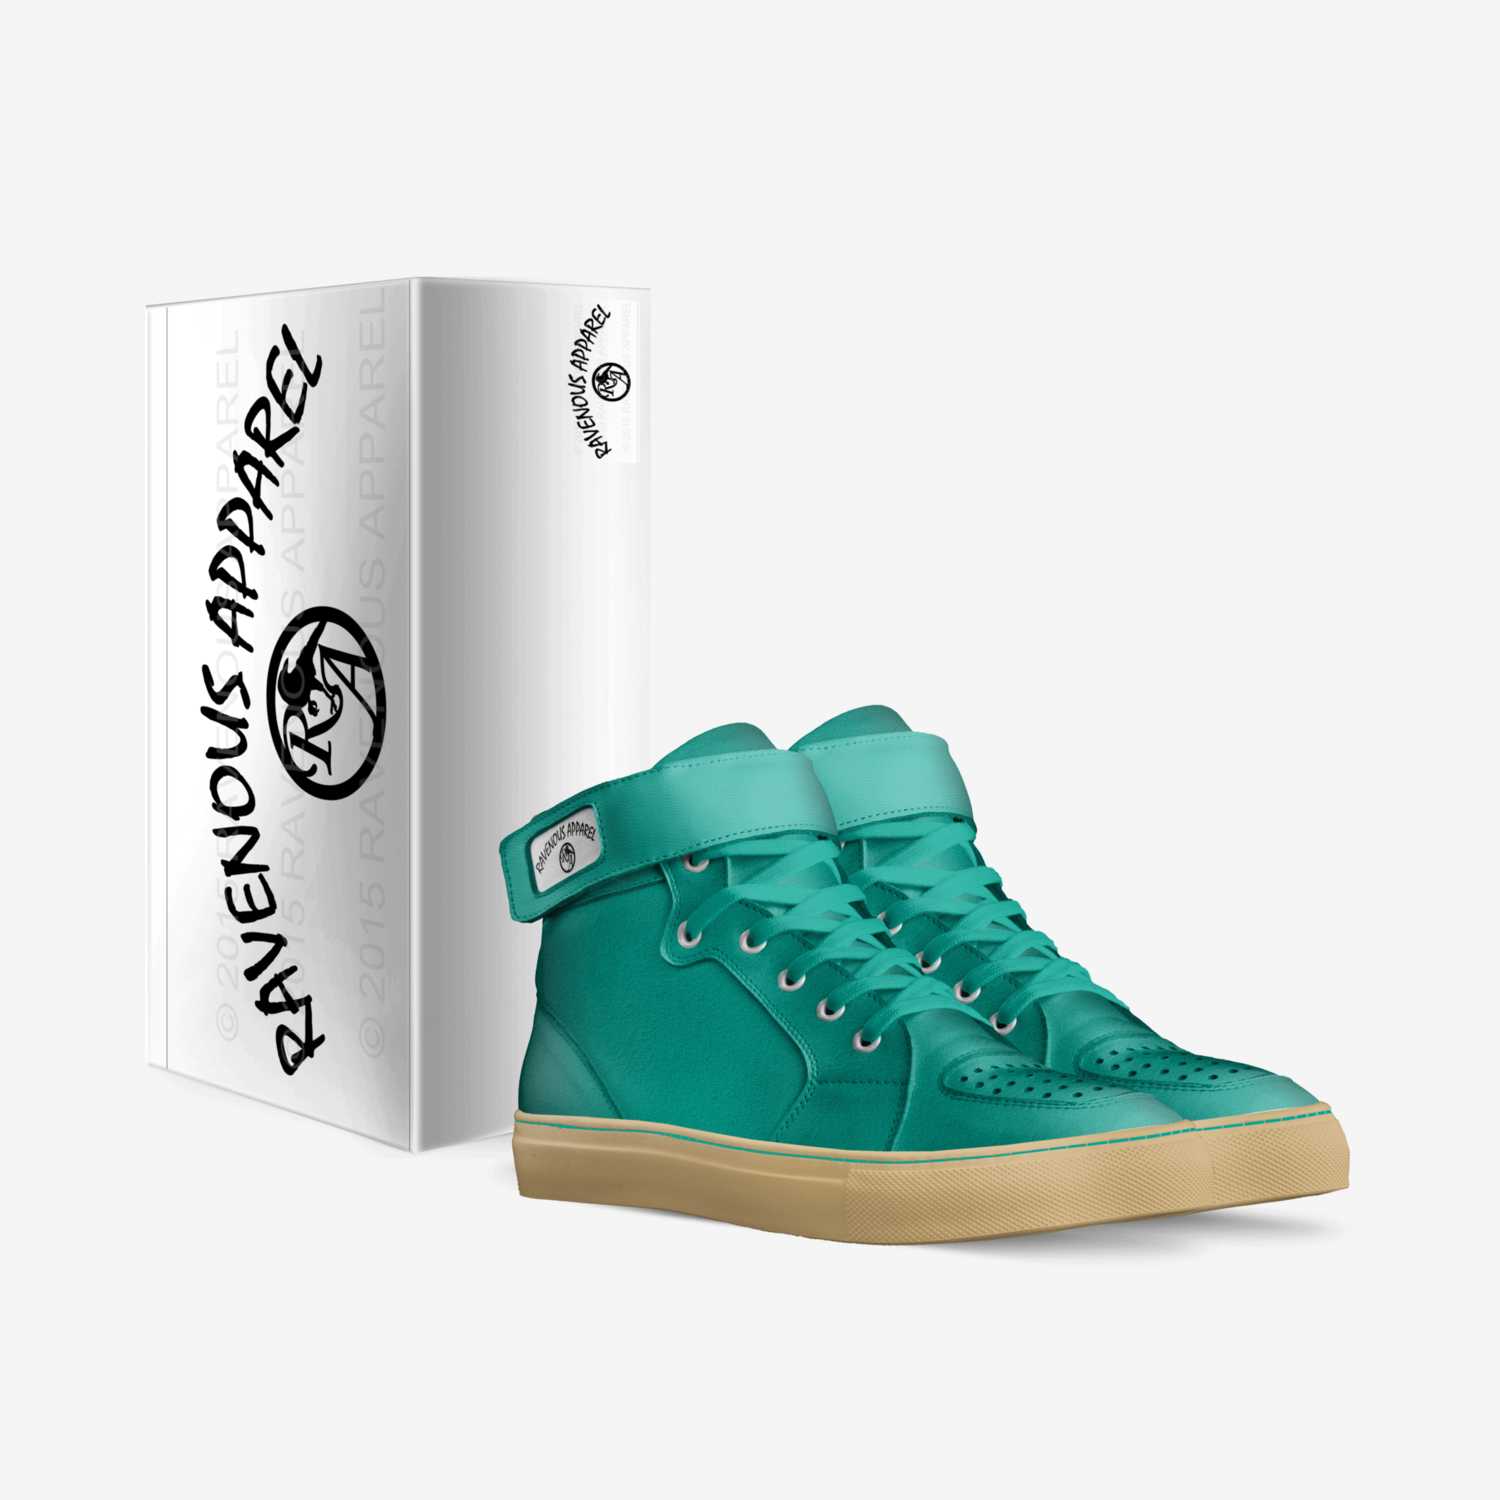 RaveTurqs custom made in Italy shoes by Thomas Rodriguez | Box view